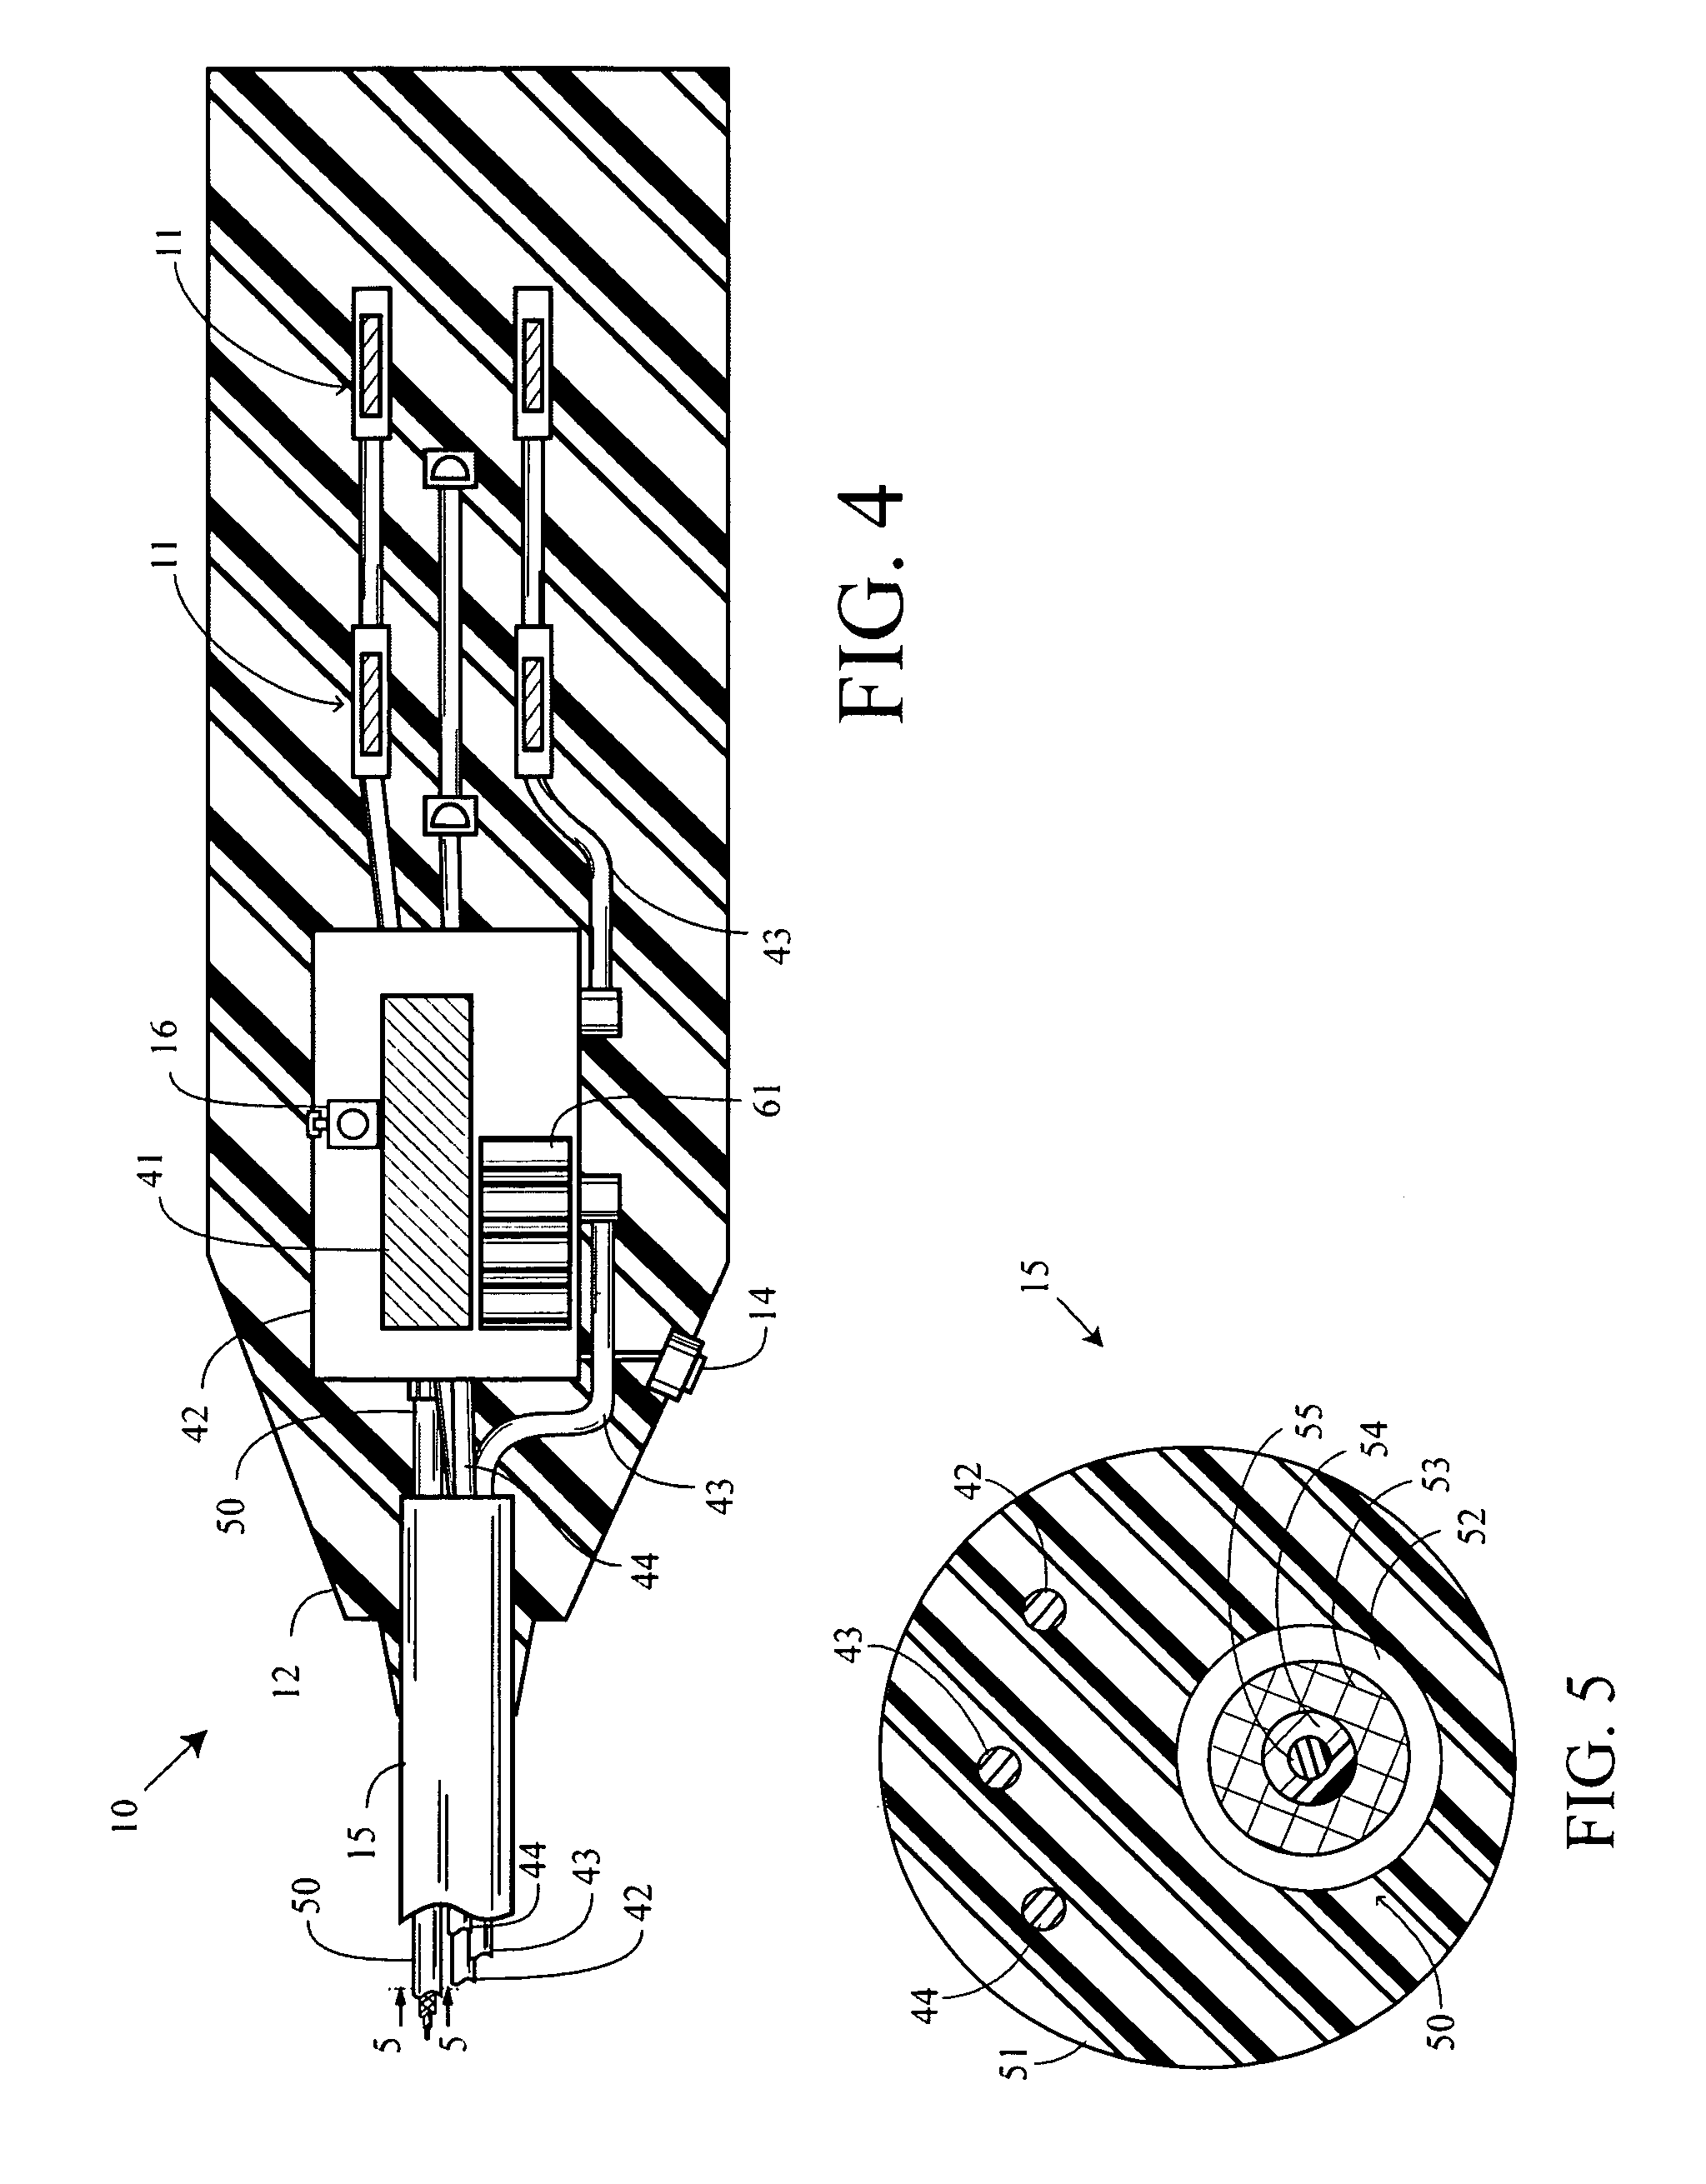 Method and system for controlling power to an electrically powered device